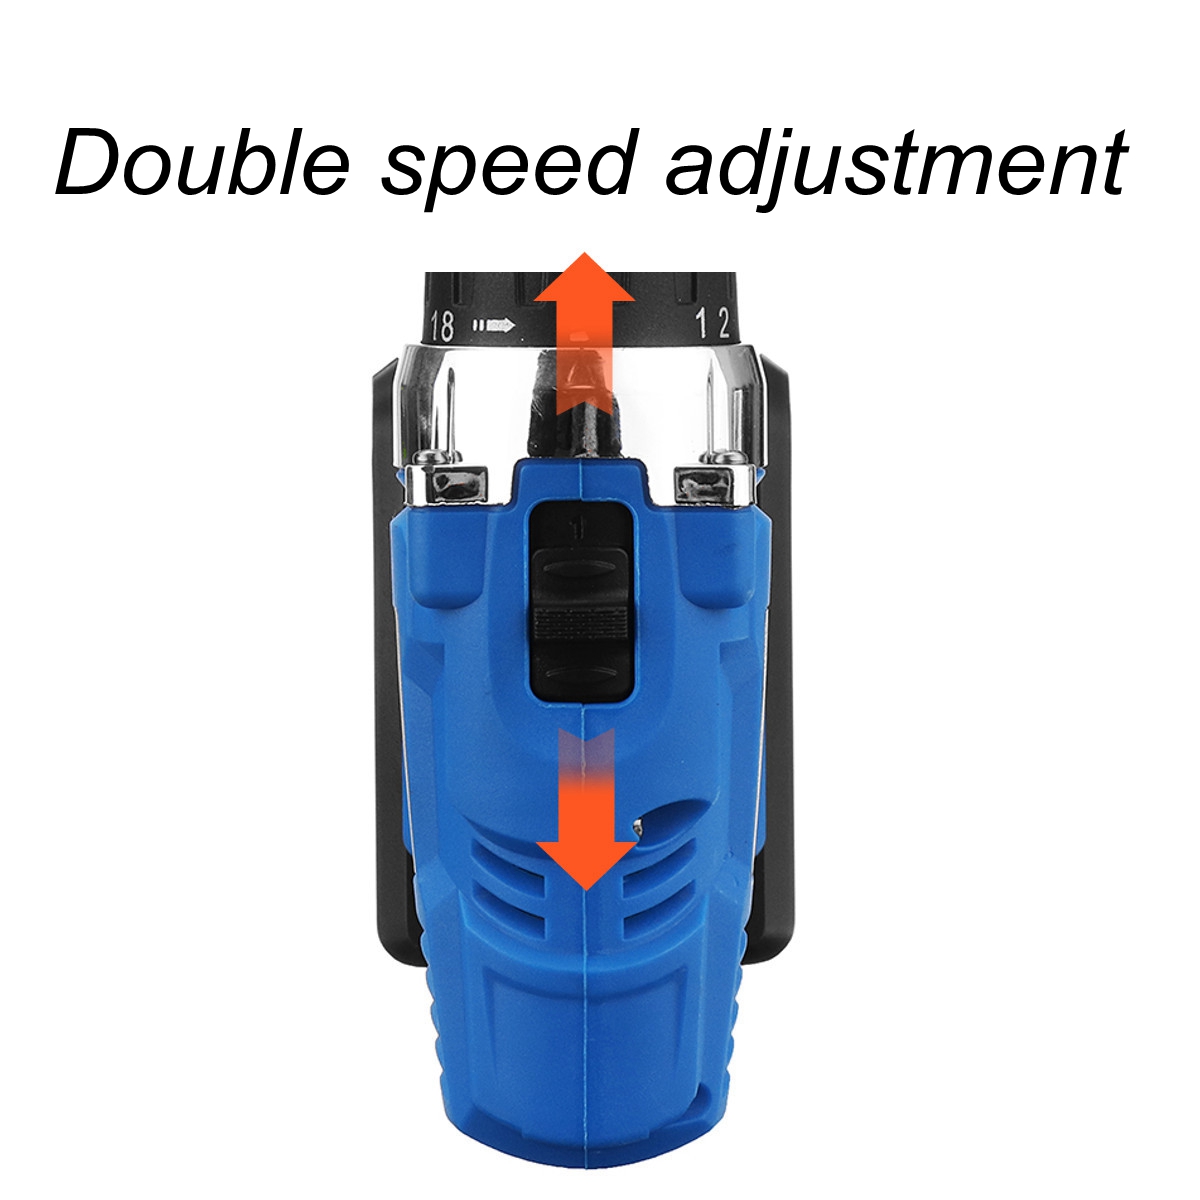 25V-Dual-Speed-Cordless-Drill-Driver-Electric-Drill-Rechargable-Power-Drills-Driver-Tool-1414380-7